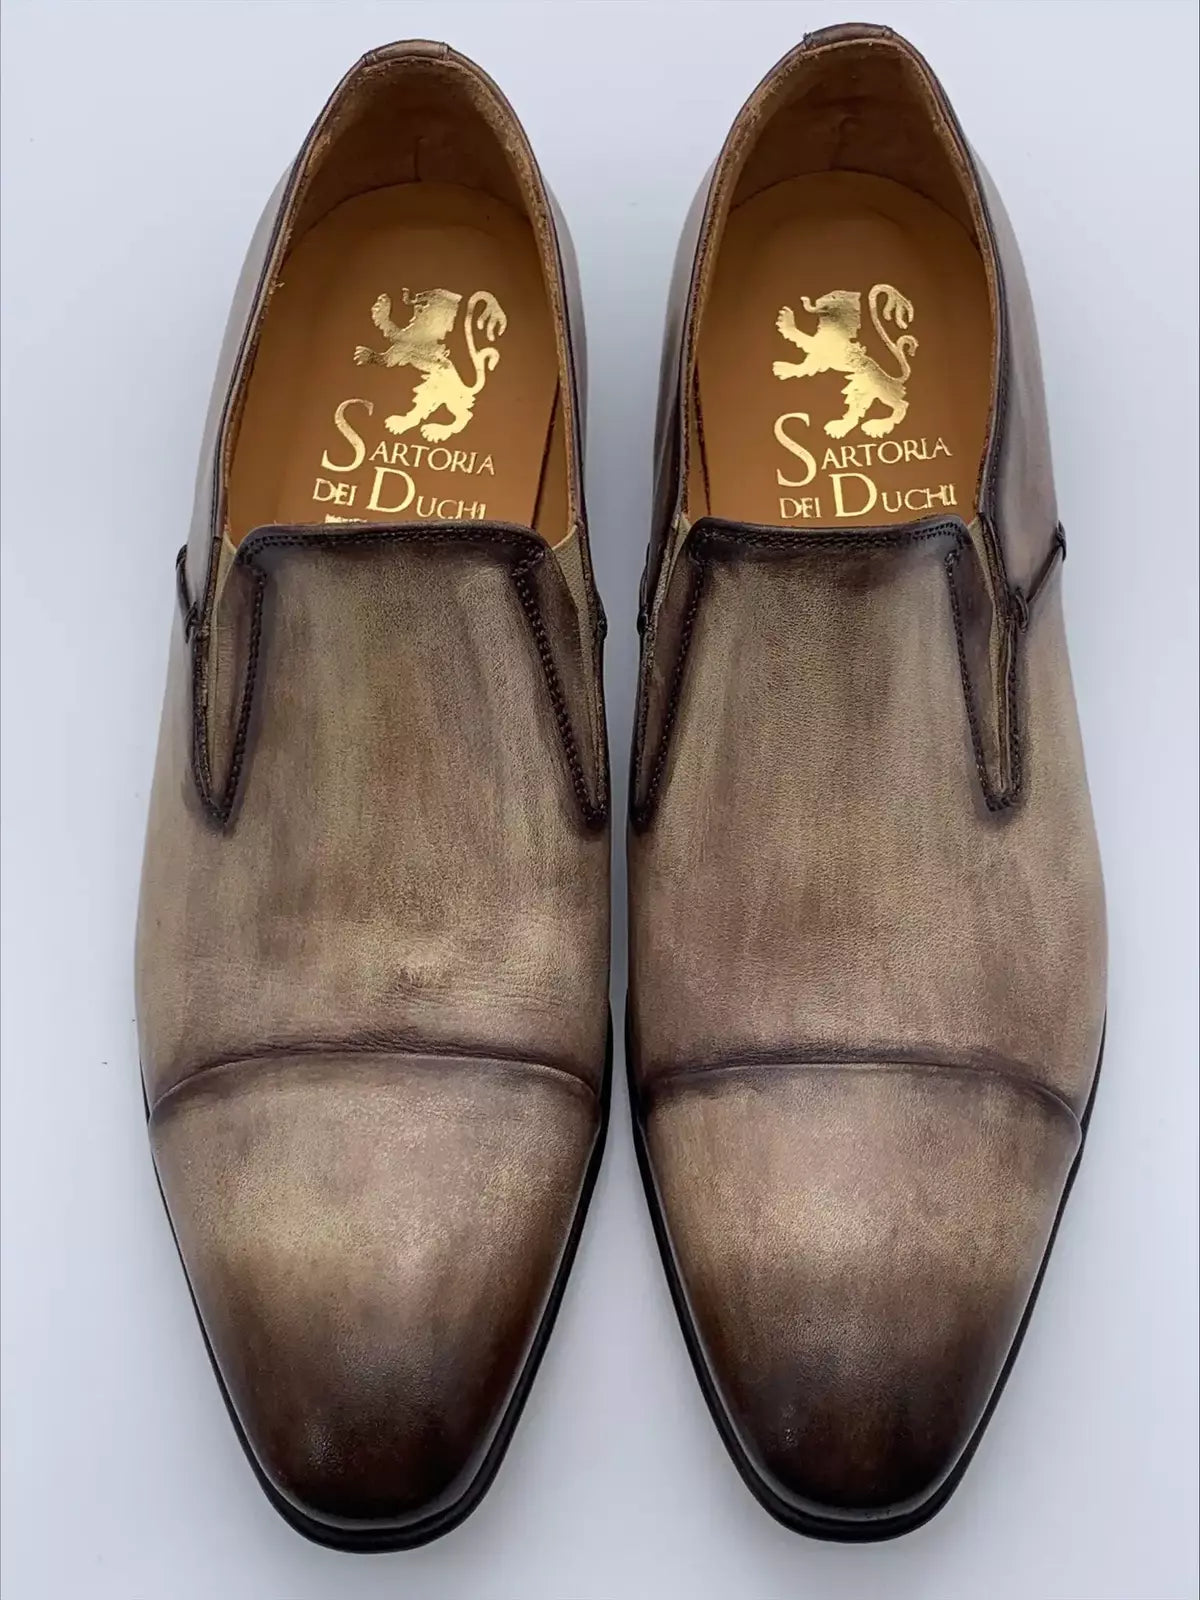 Moccasin in leather velour crust colored and antiqued by hand, sand and tobacco color, with light calfskin interior. In Blake processing the shoe is mounted on the shape and with a machine called "Blake", the sole is sewn to the insole and upper. This process guarantees the tightness of the bottom.| Sartoria Dei Duchi - Atri